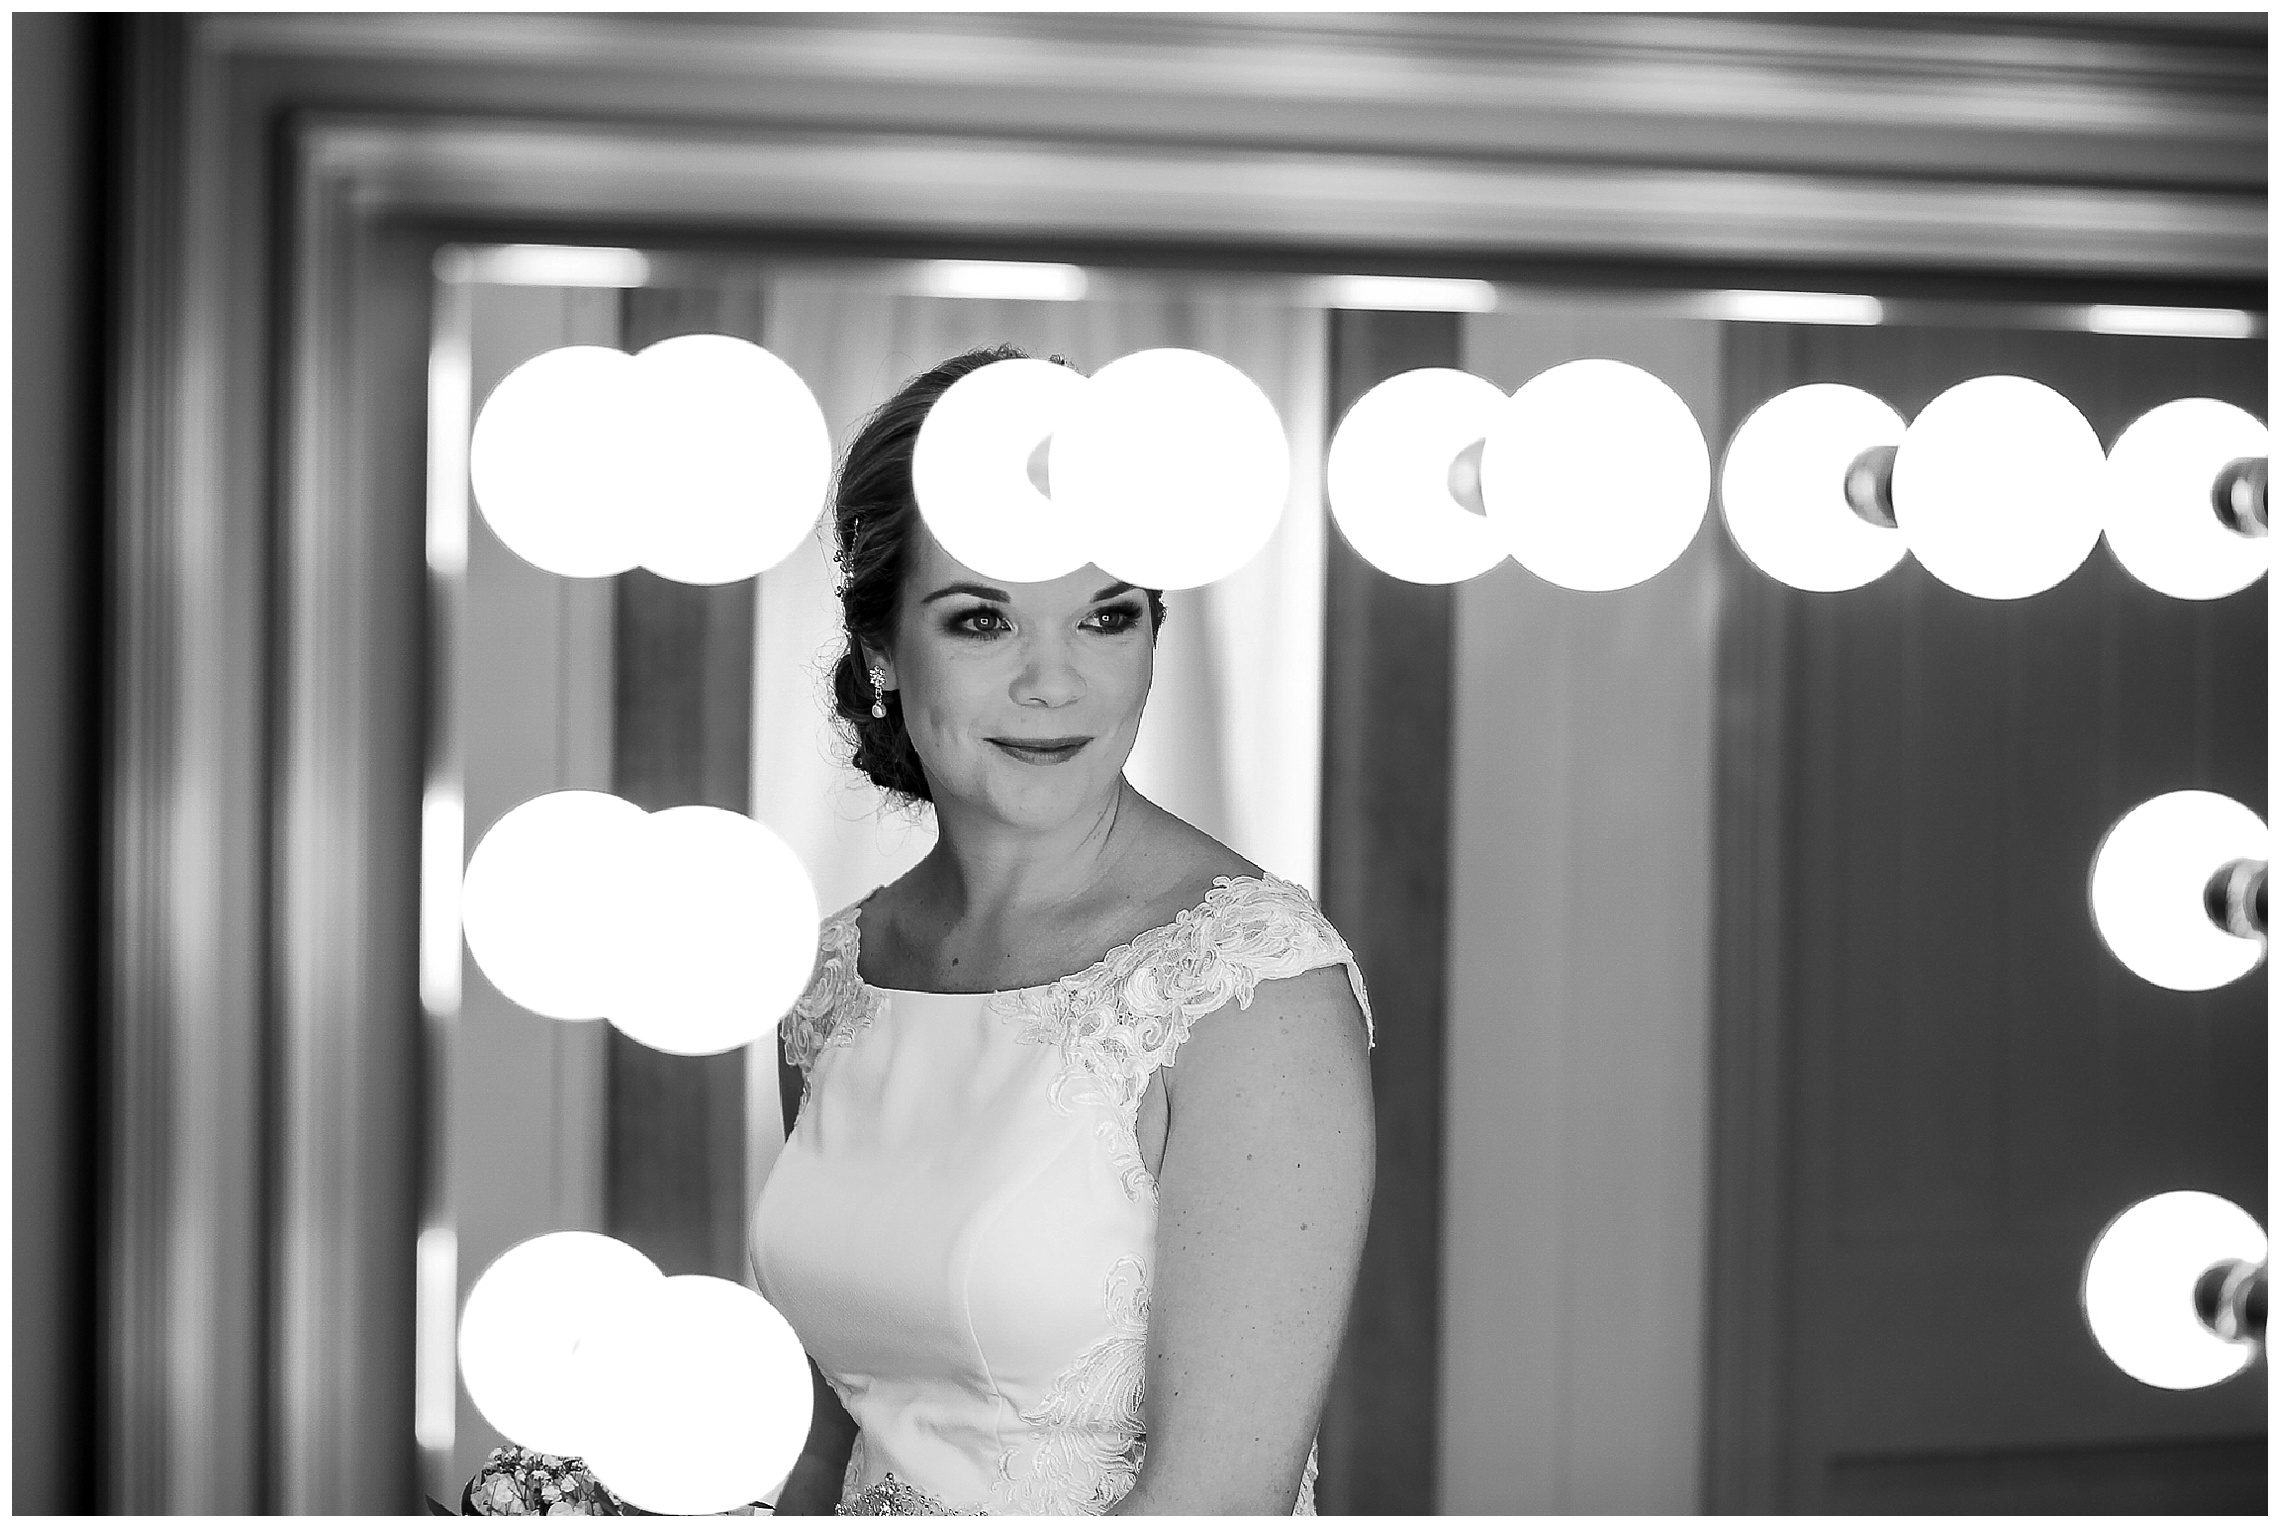 Bride looks at herself in the mirror